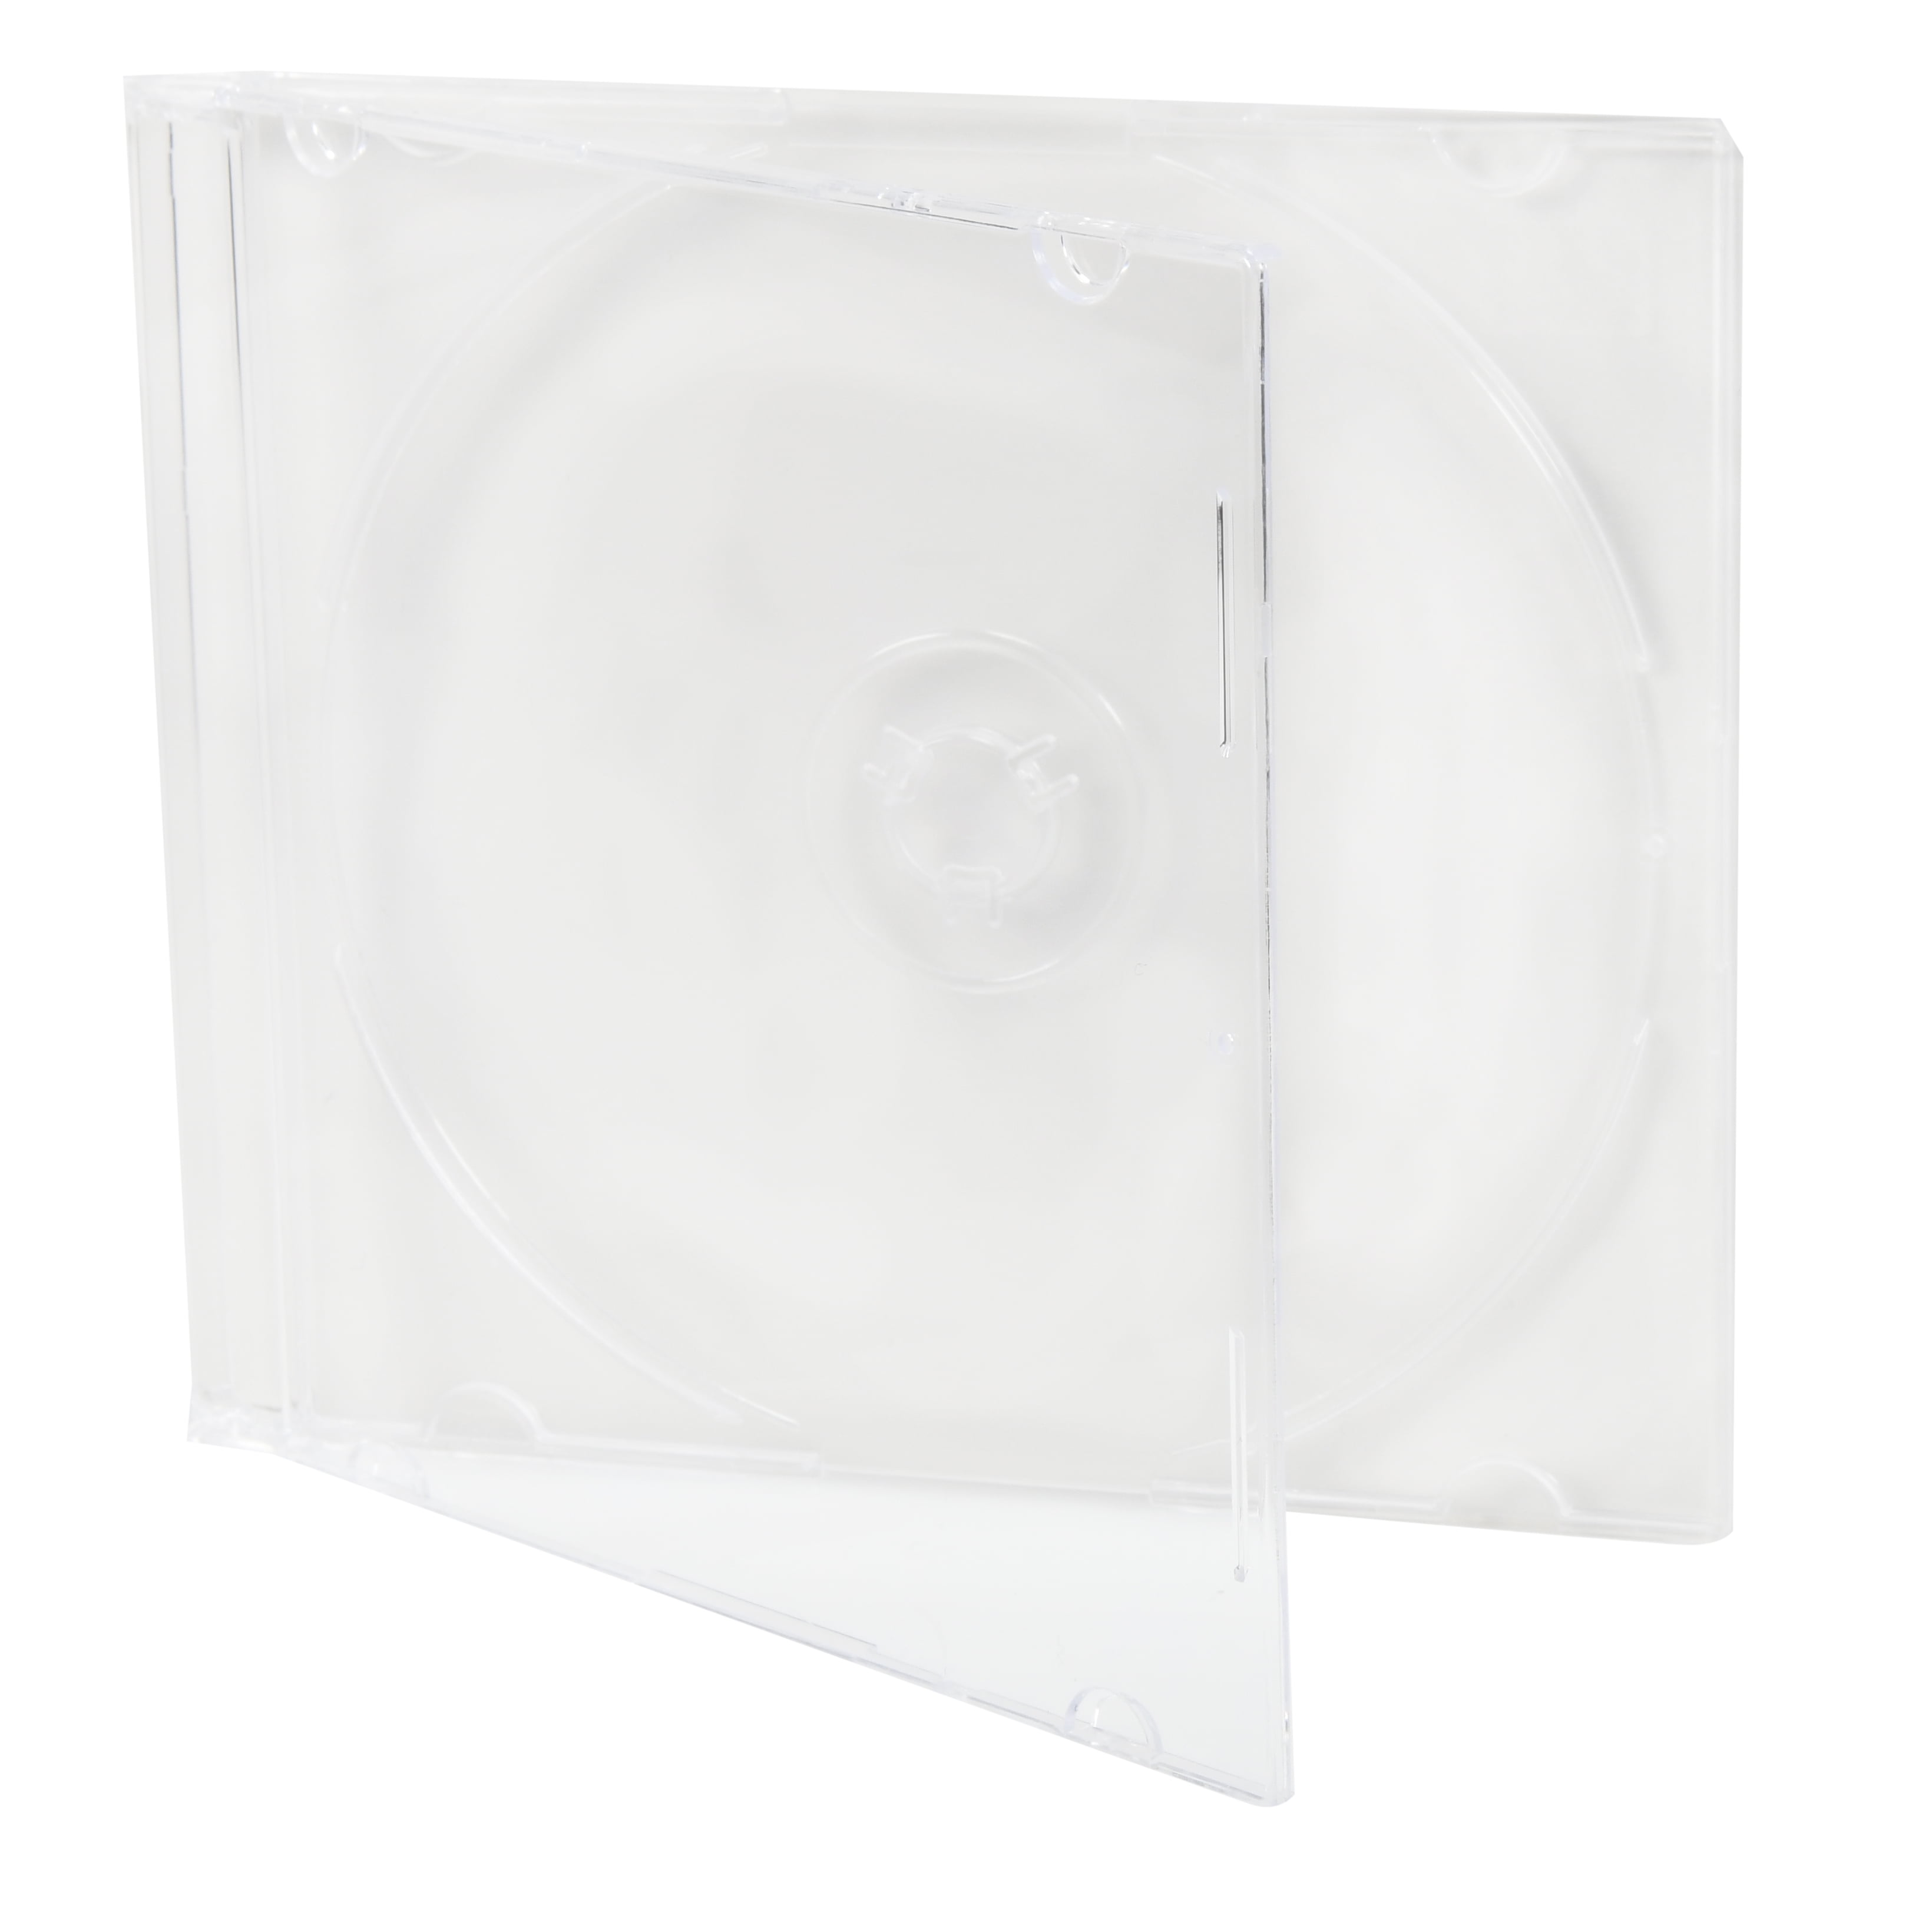 Single CD Jewel Case Slim 5.2 mm Frosted Clear Blank New Replacement Cover 